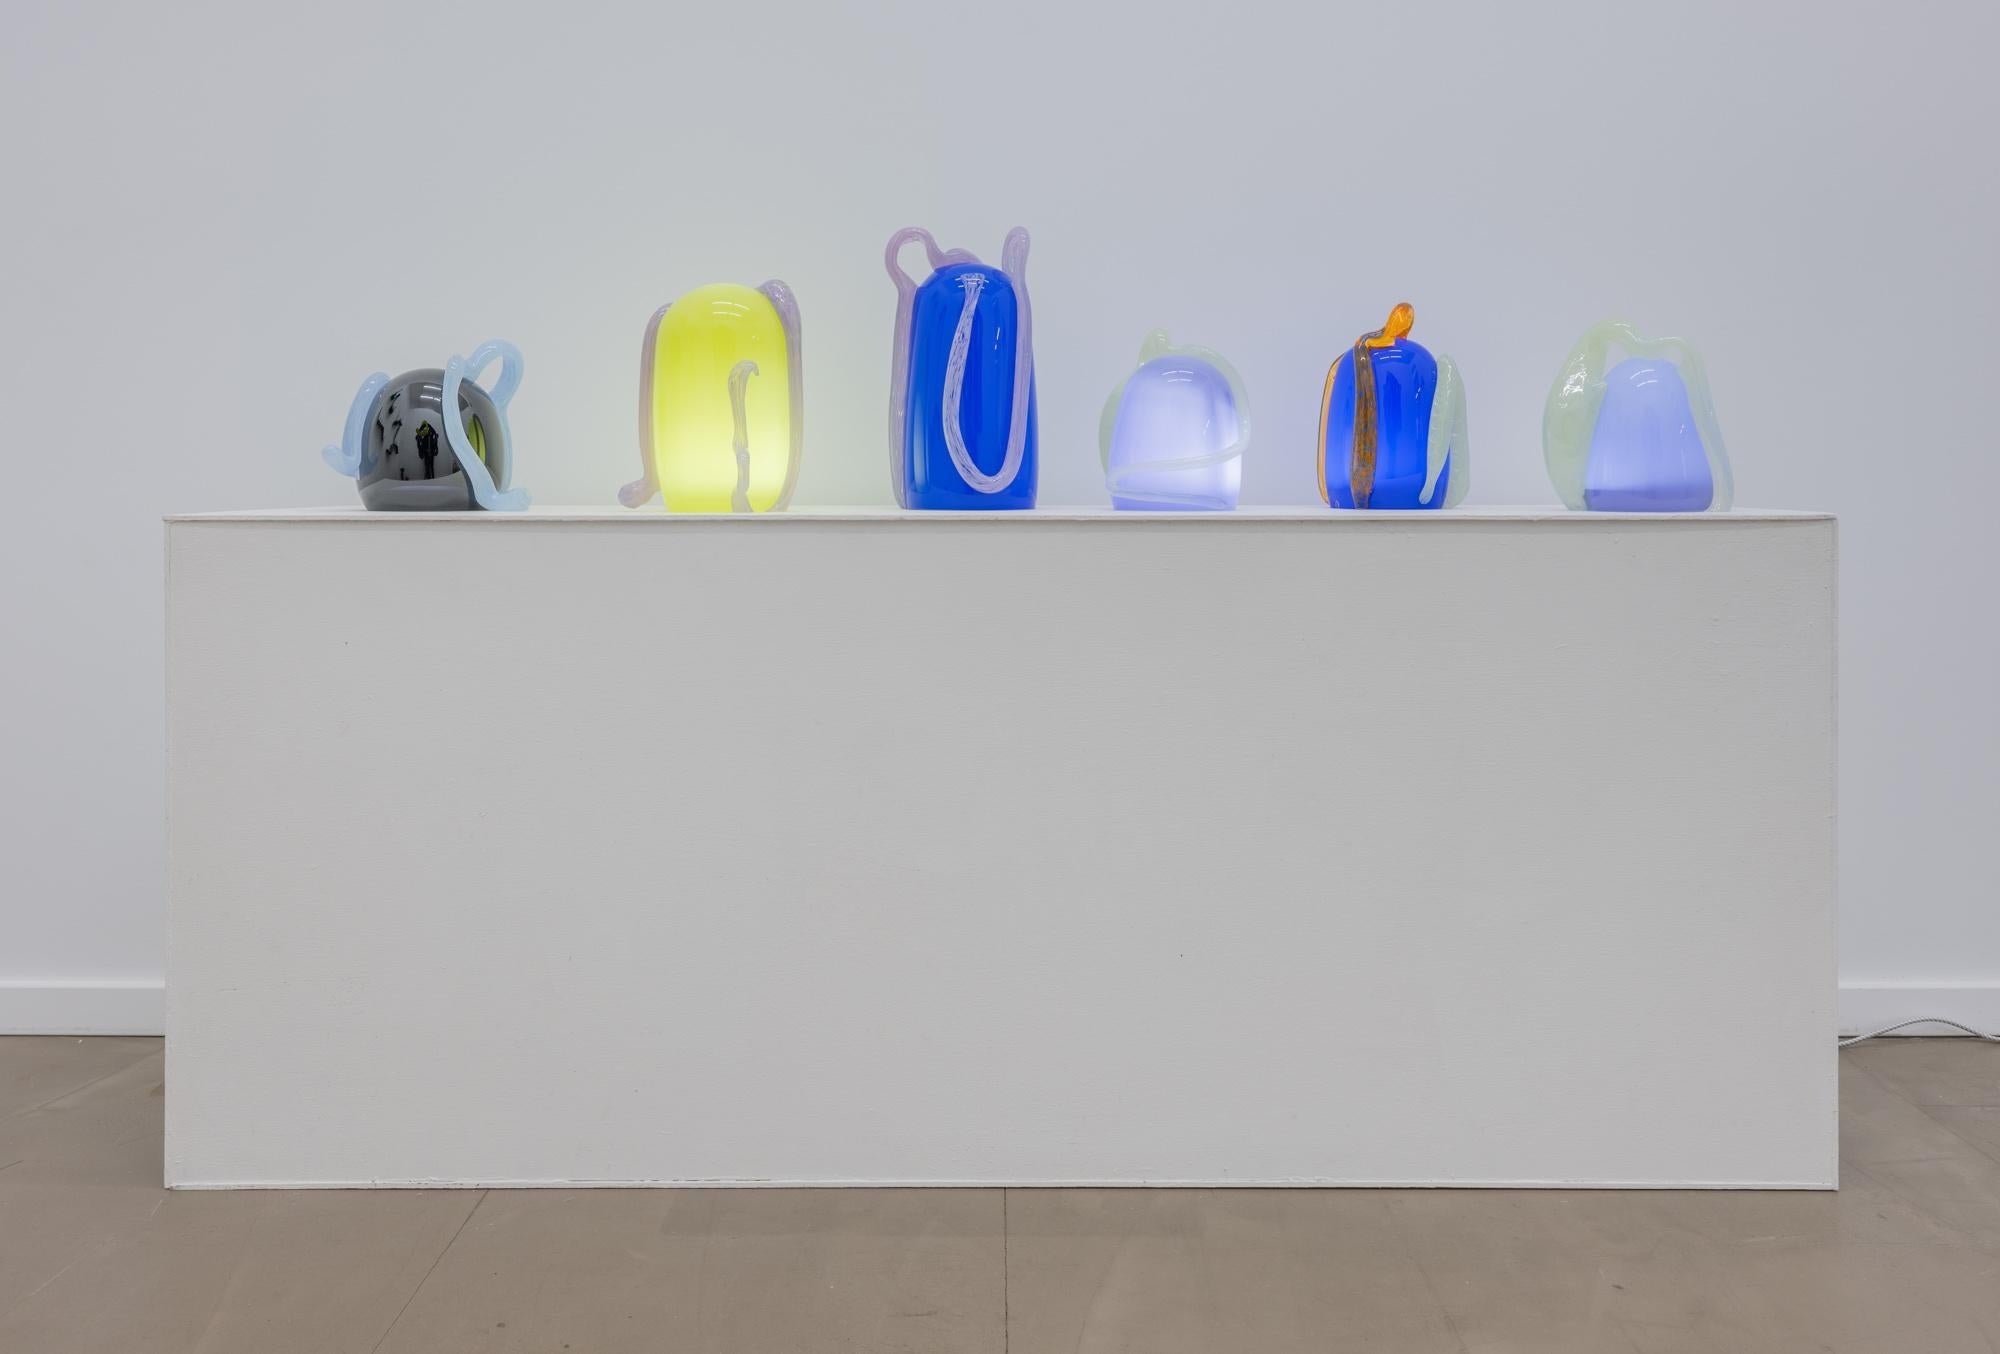 This work intends to highlight glass details, such as colors and patterns, that can be intensified when a light source is present.The glass sculptures are joyful through colors and grotesque through shapes. With a color palette of loud neons and